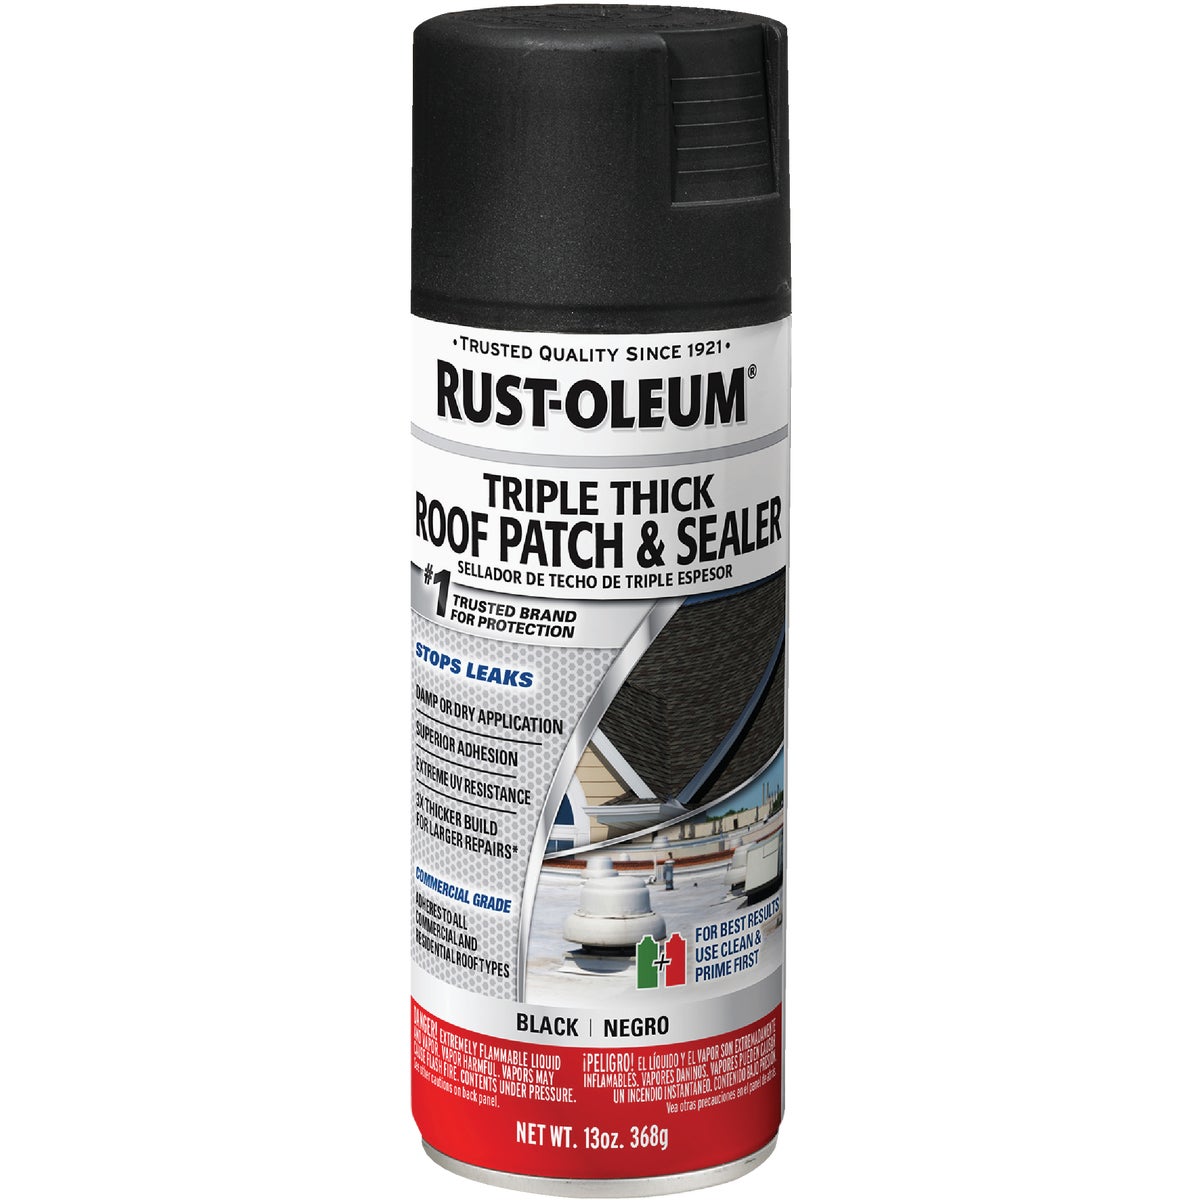 Rust-Oleum 13 Oz. Roofing Triple Thick Roof Patch & Sealer Black Spray